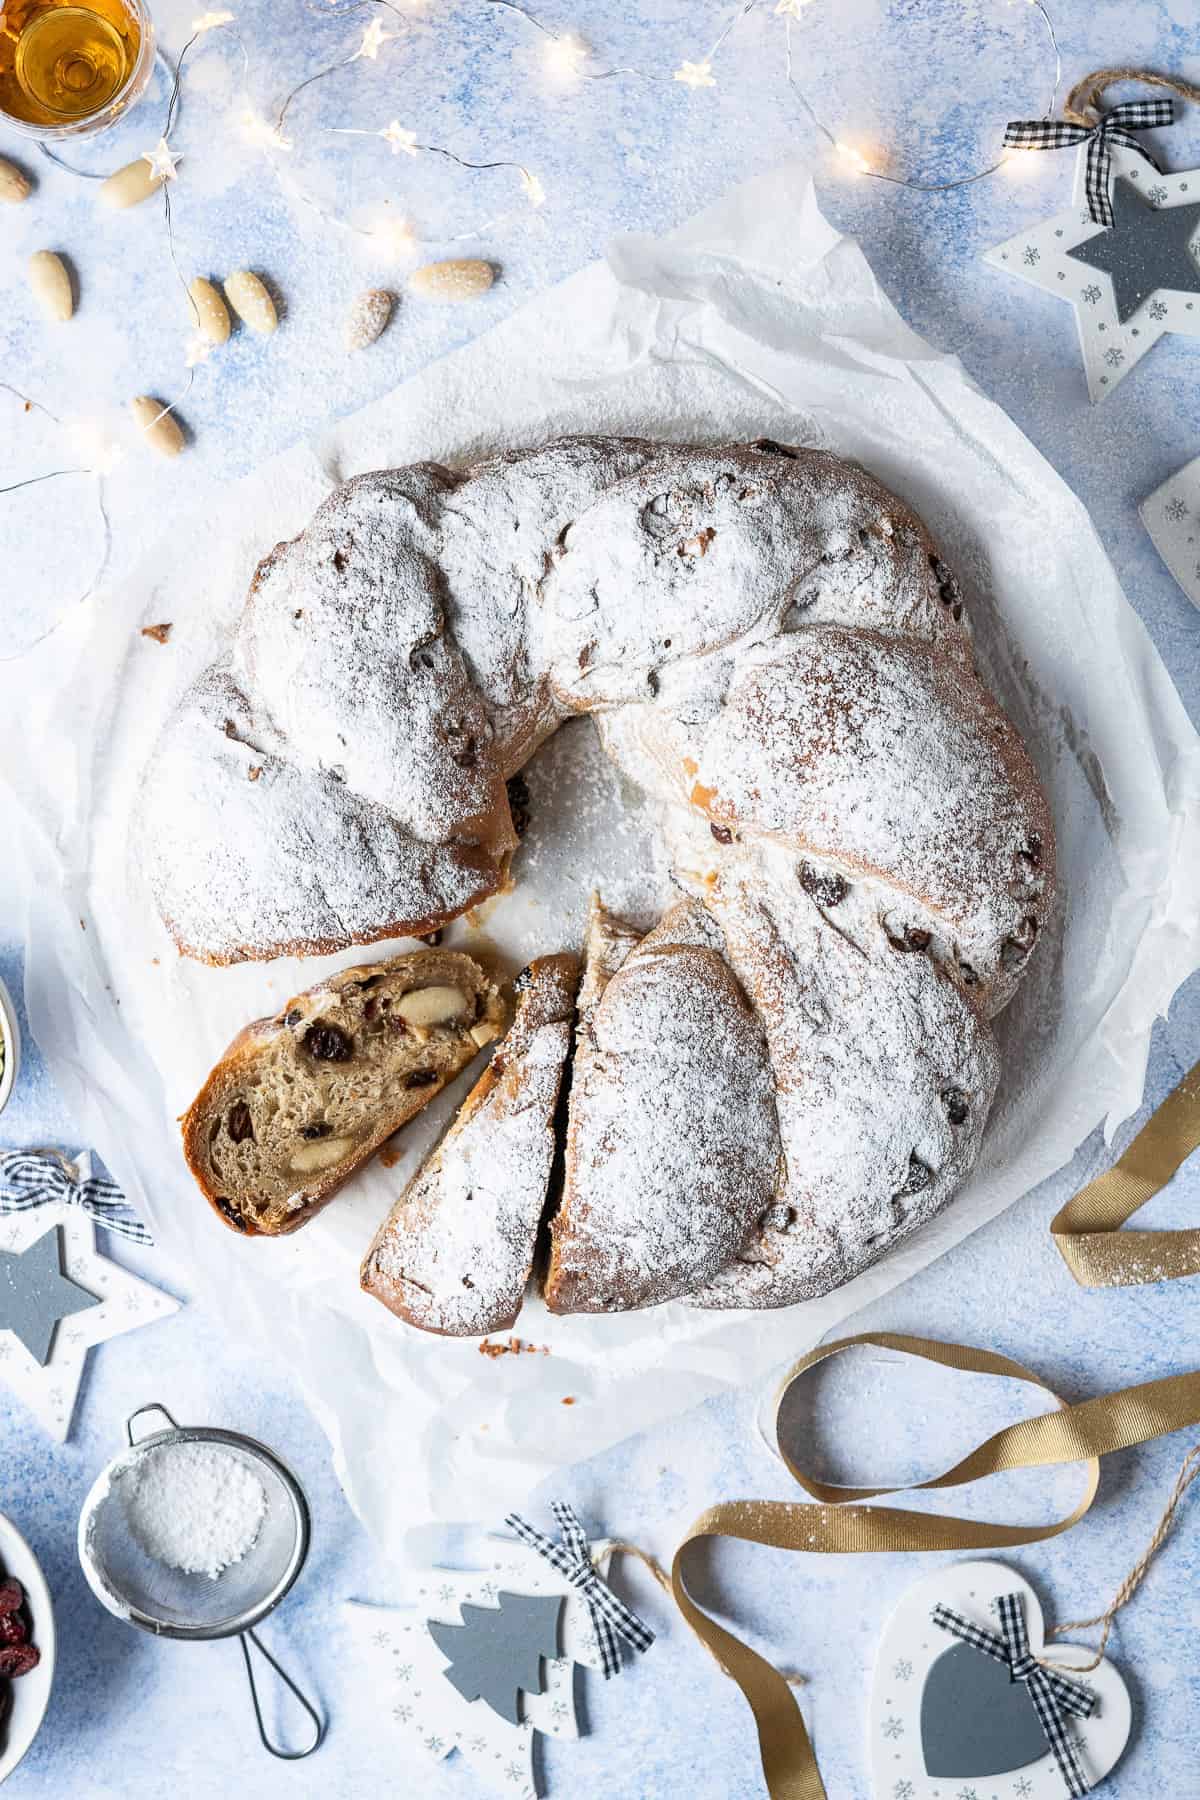 Vegan stollen wreath on a sheet of white baking parchment on a blue surface with christmas decorations and lights.